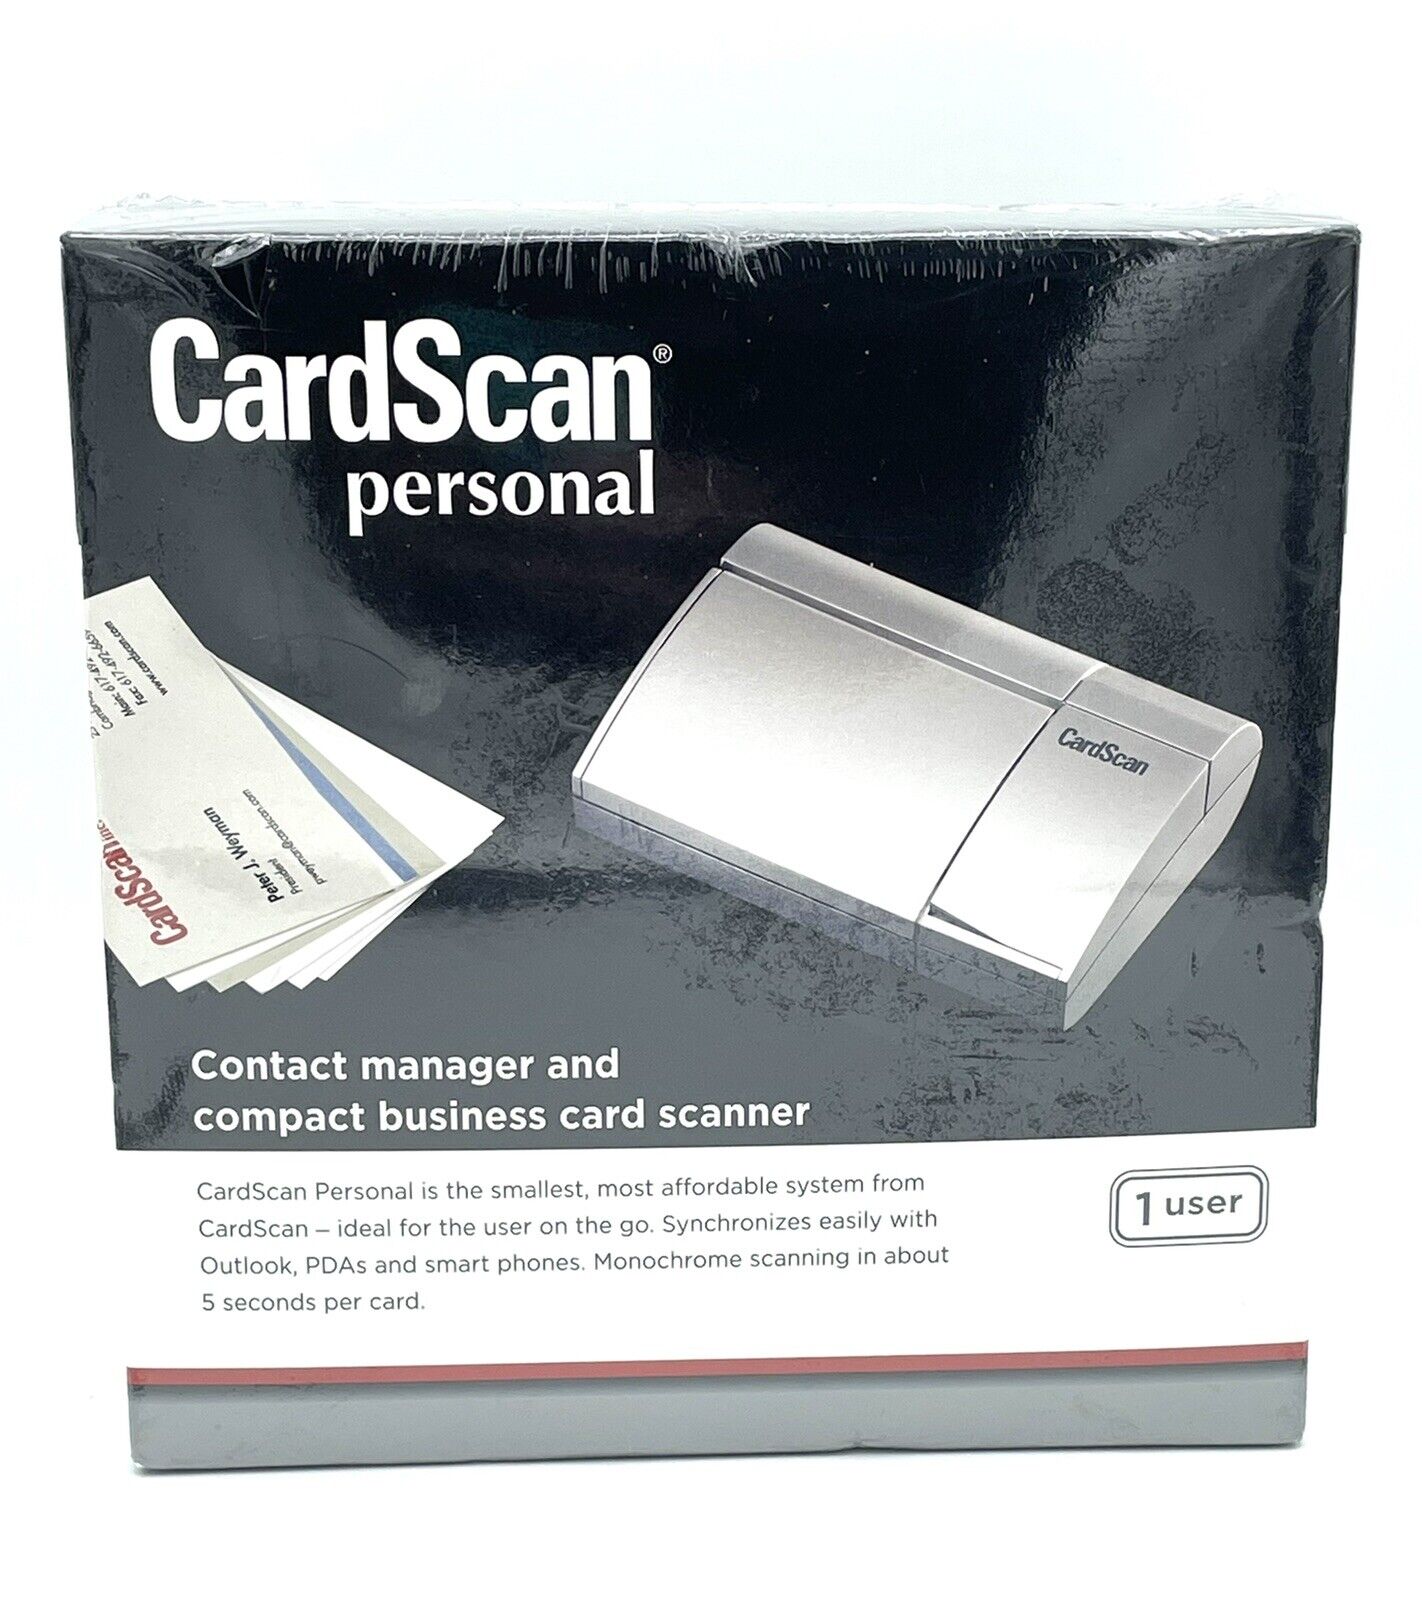 Cardscan Personal Contact Manger Business Card Scanner V8 NEW Sealed Box